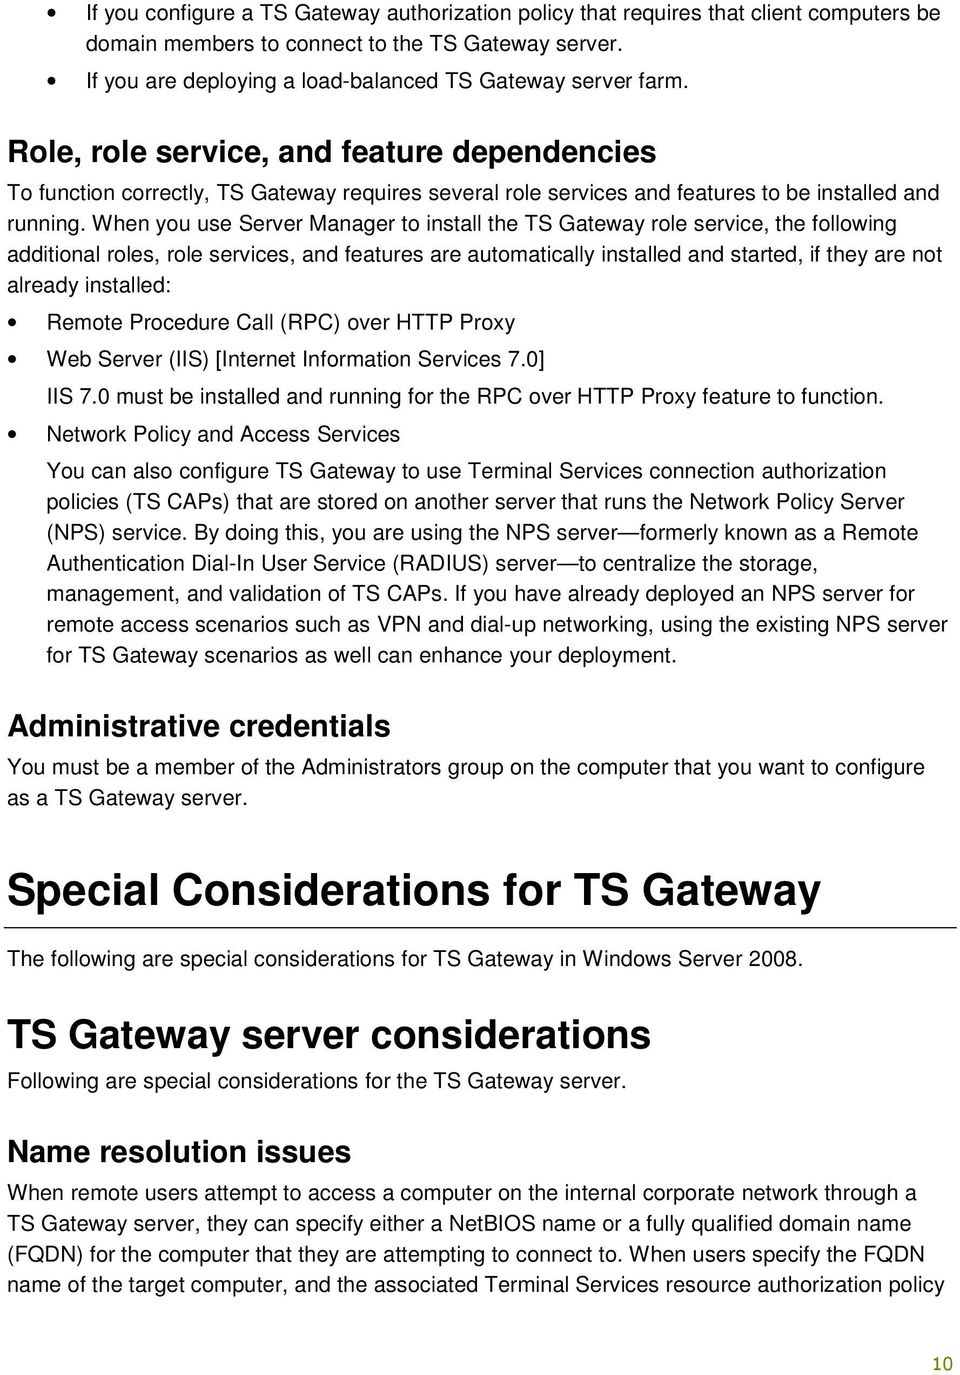 Role, role service, and feature dependencies To function correctly, TS Gateway requires several role services and features to be installed and running.